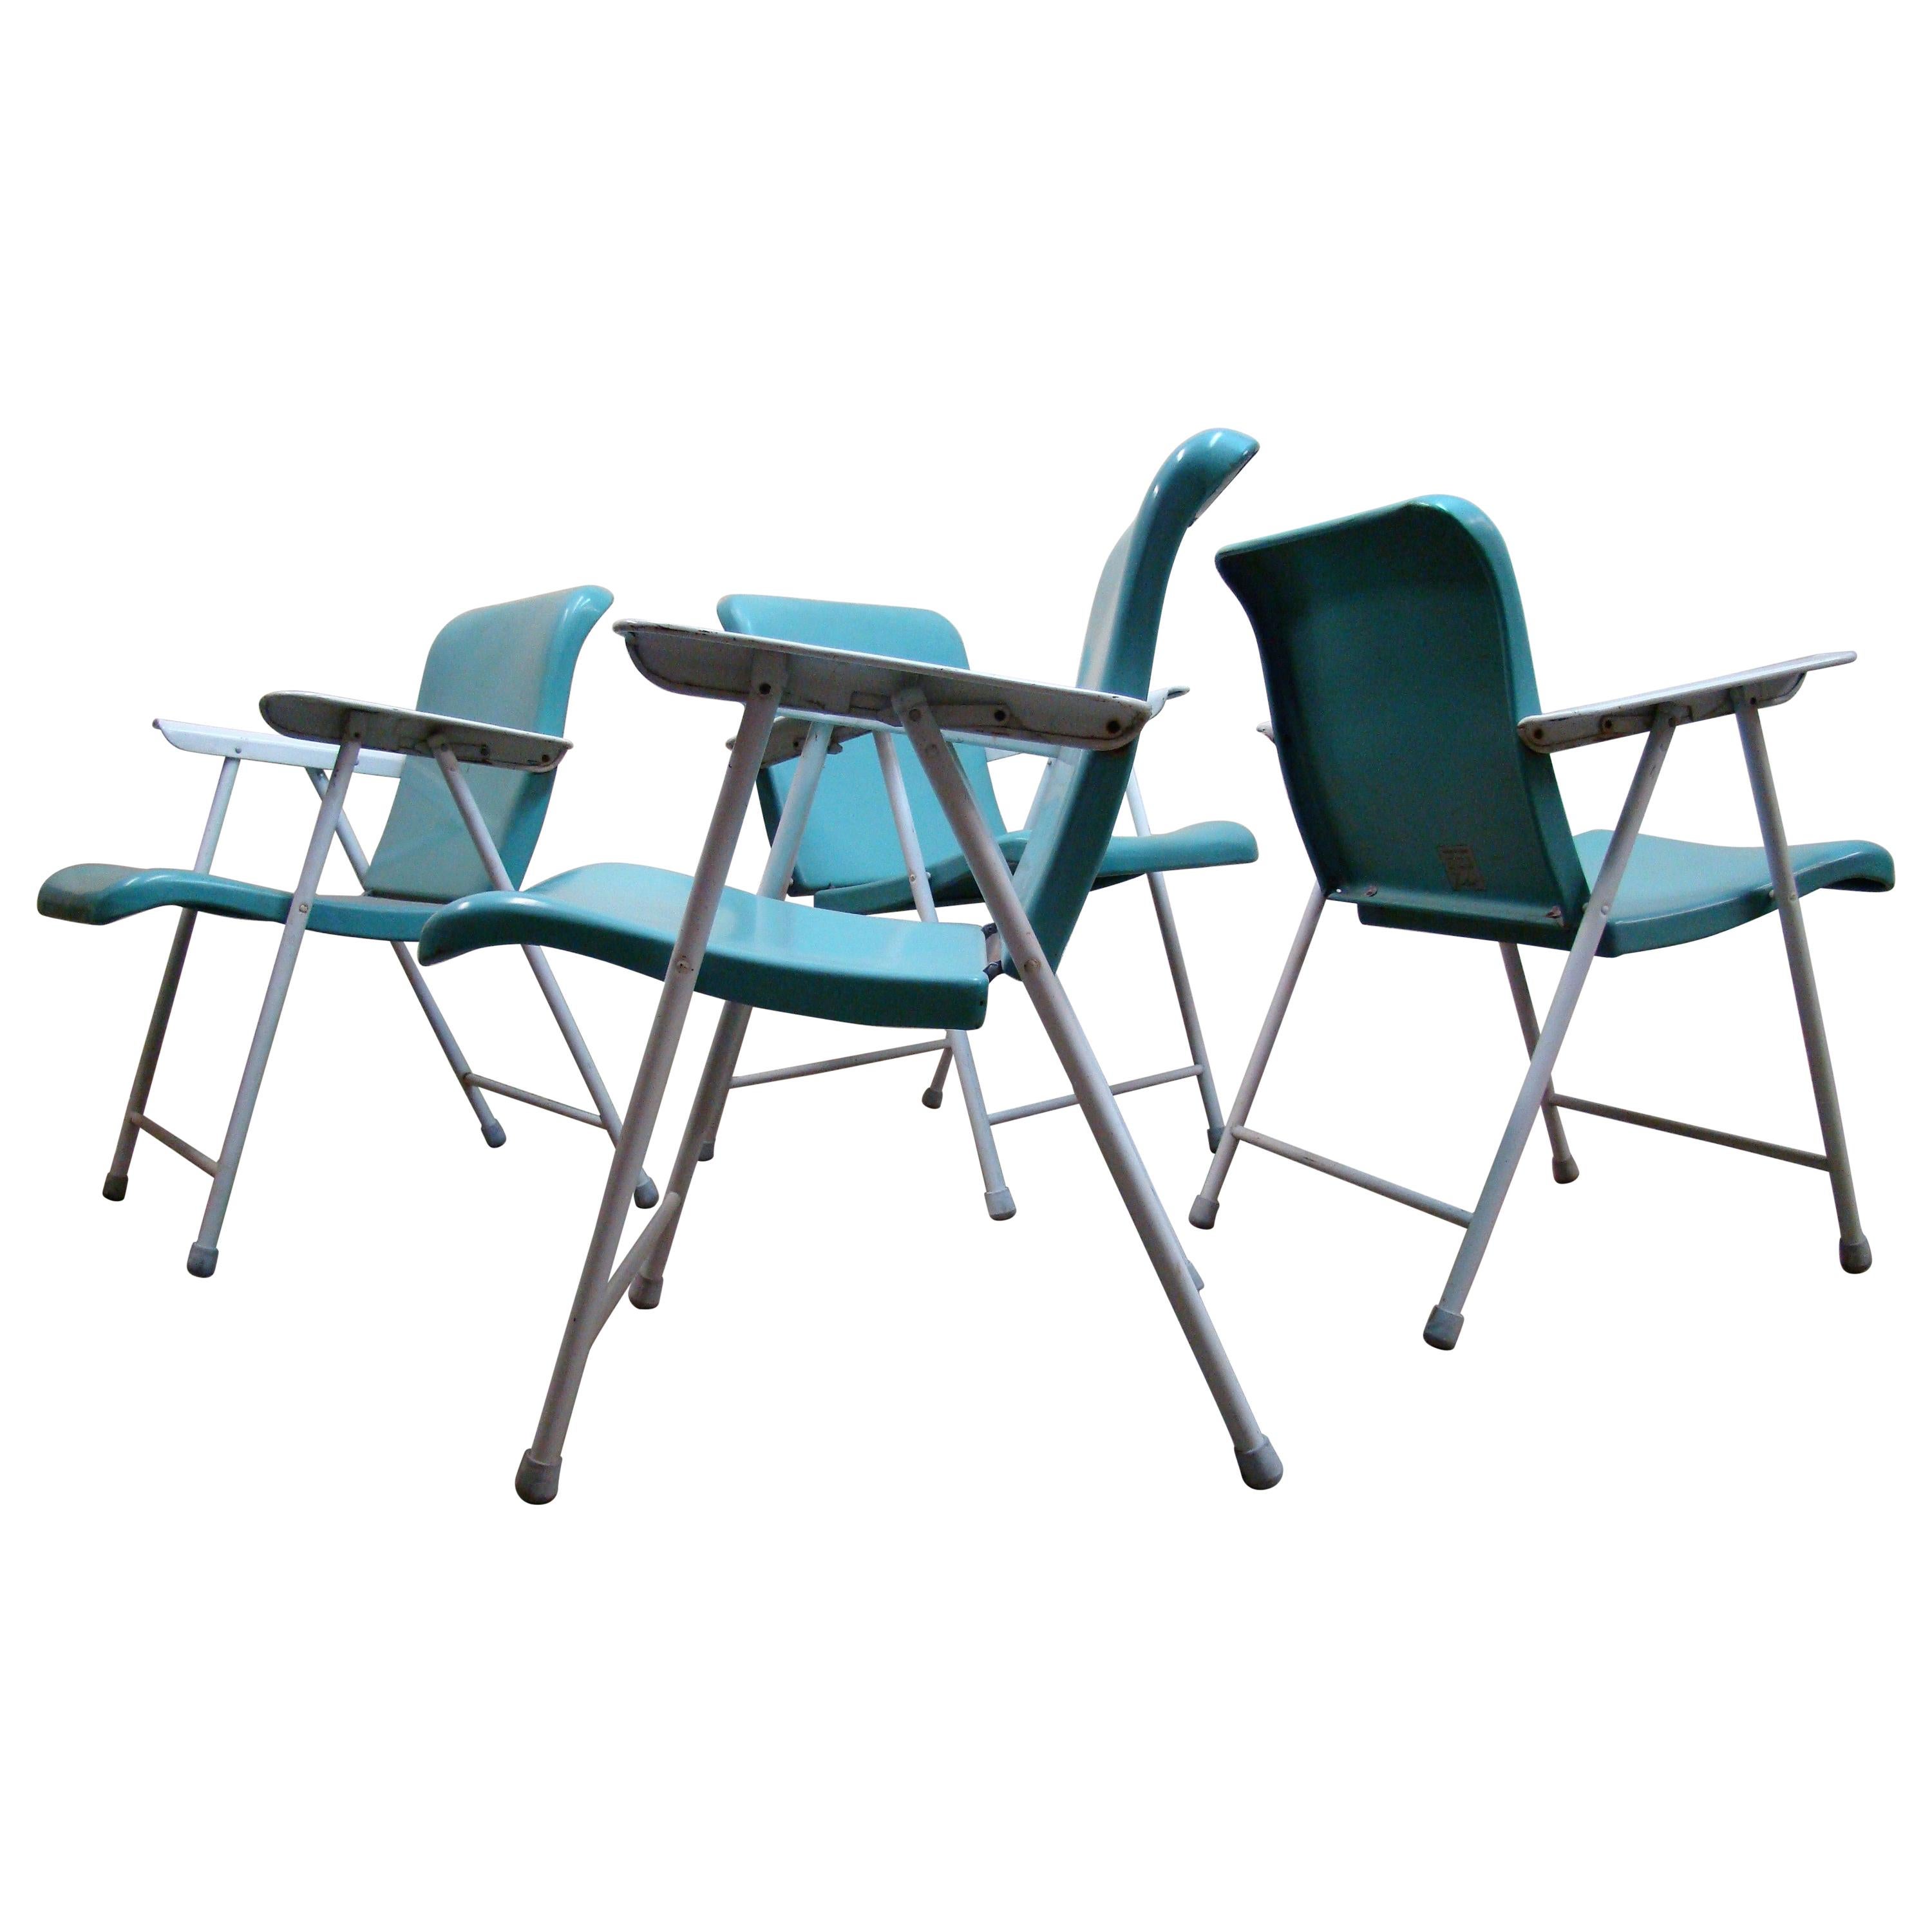 Original "Sky Blue" Russel Wright Folding Metal Outdoor Chairs, 1950s For Sale